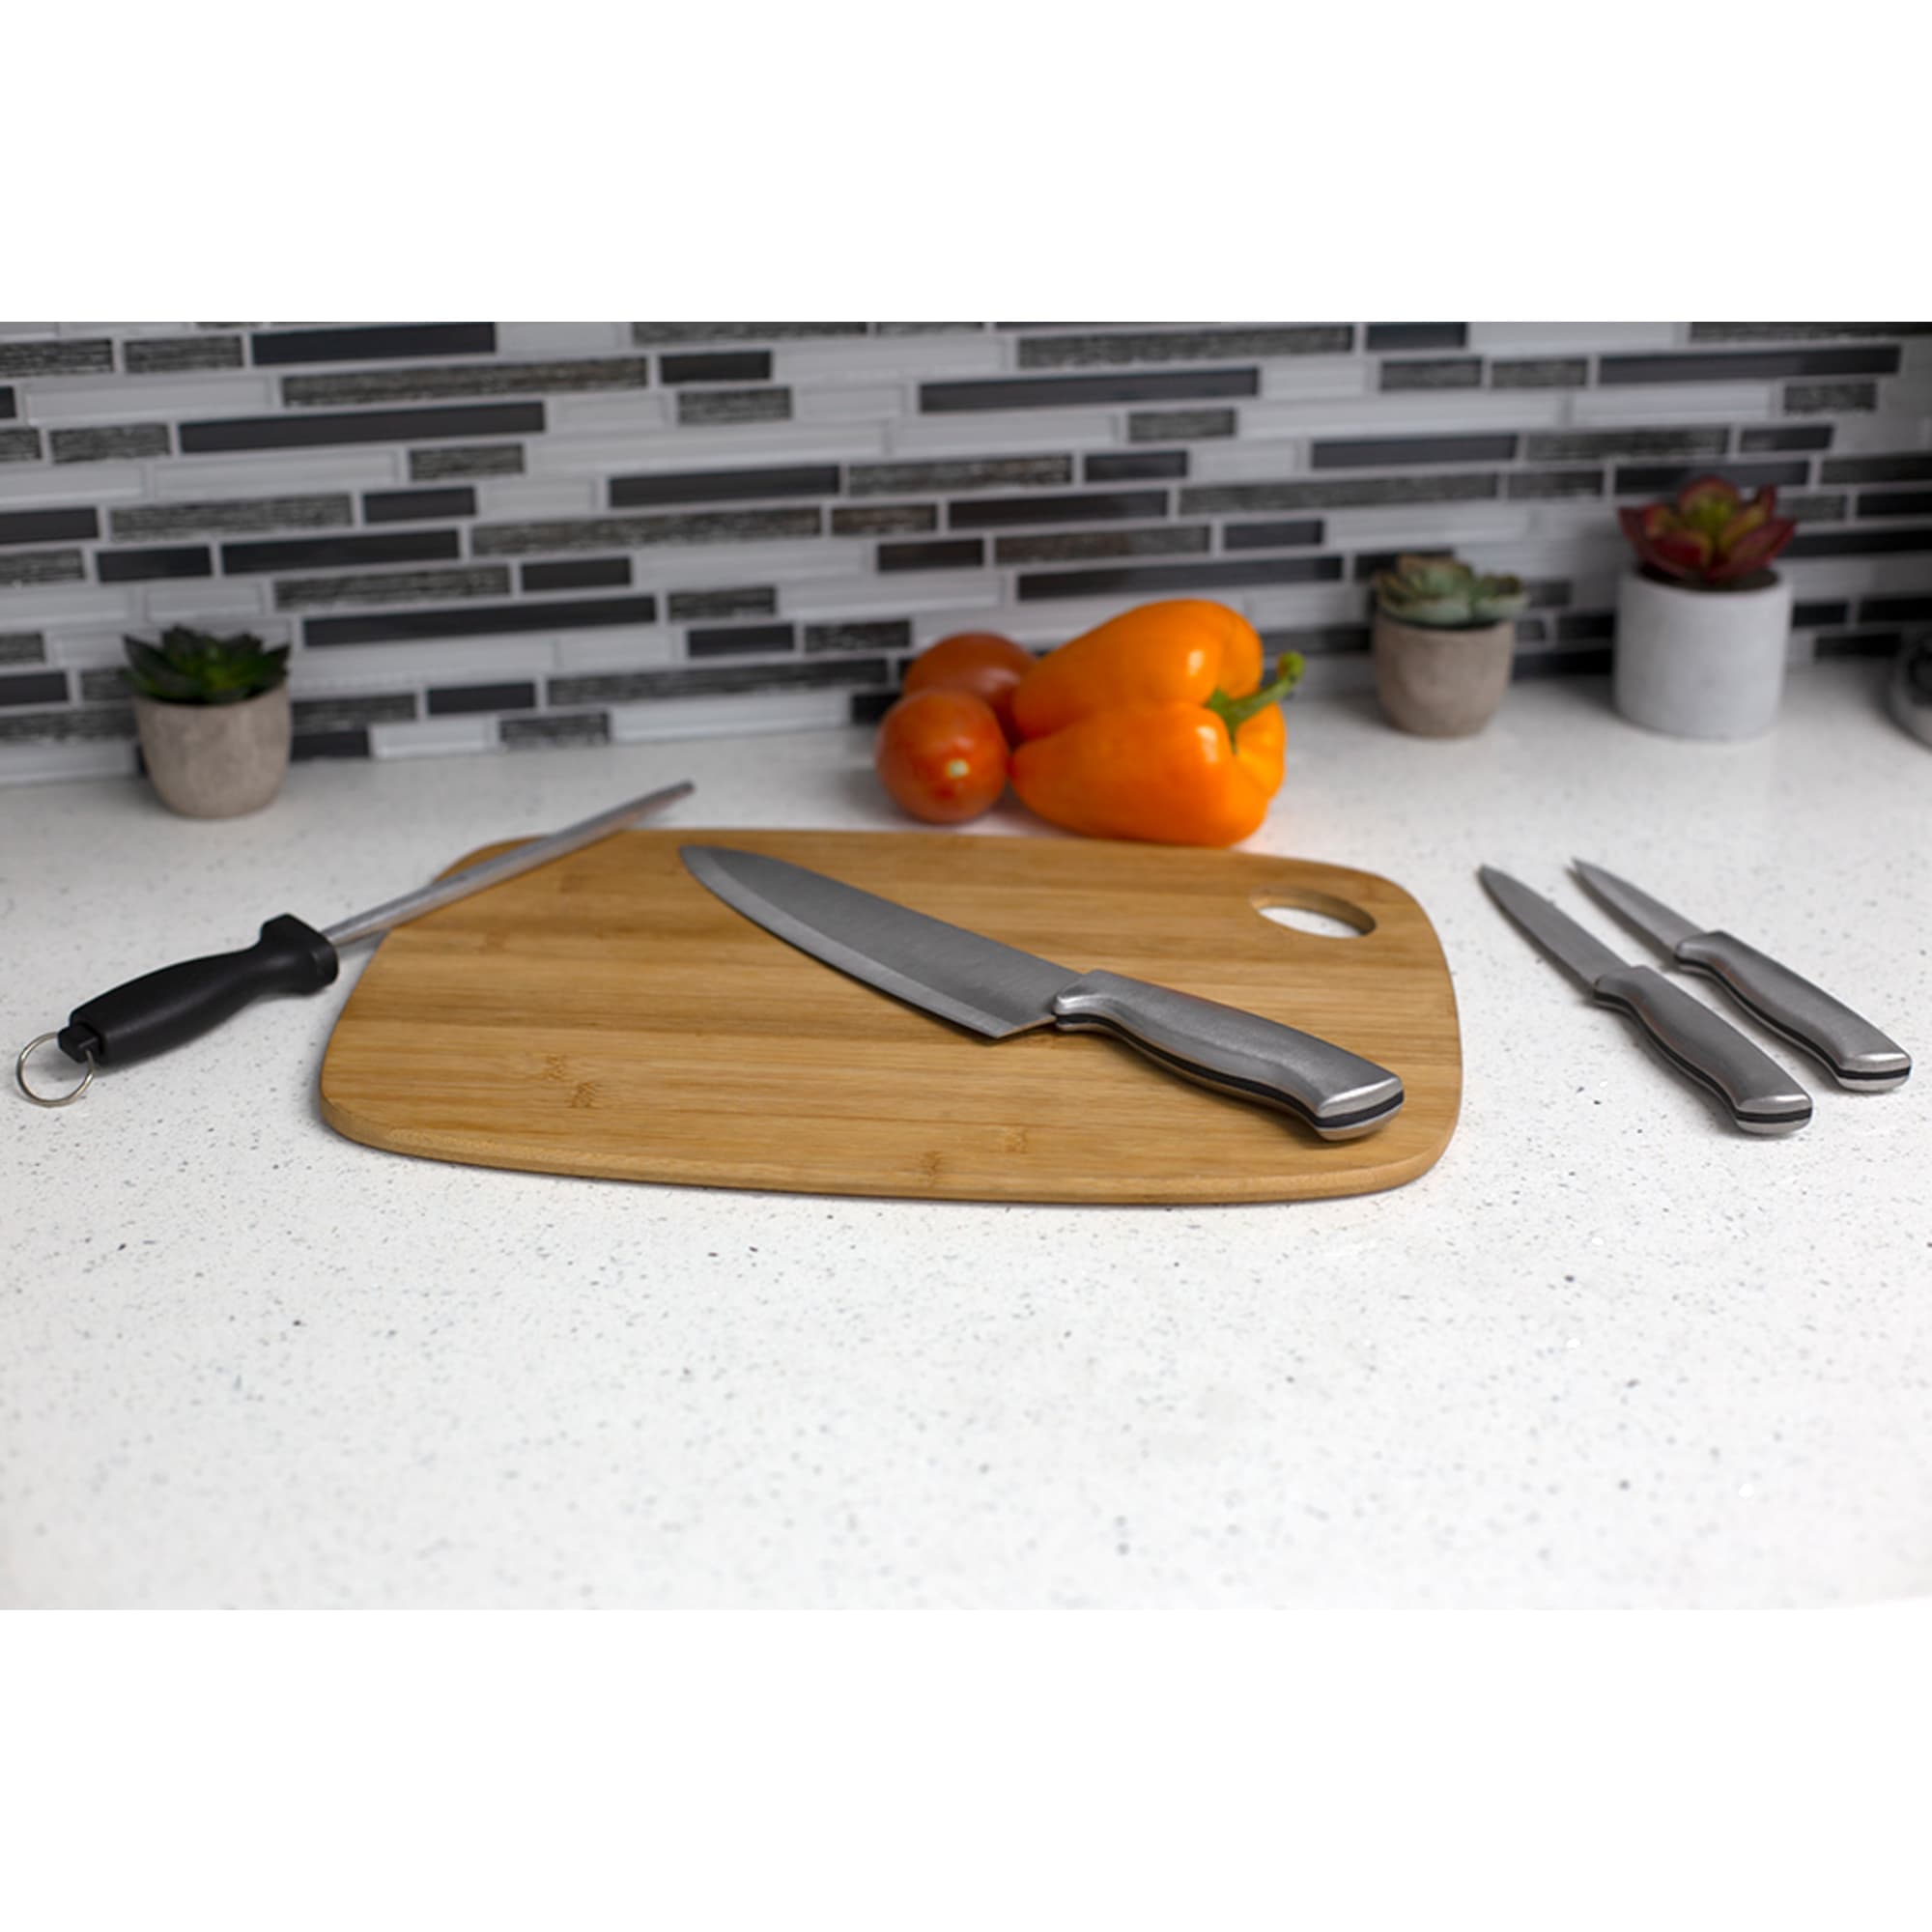 Home Basics Stainless Steel Knife Set with Knife Blade Sharpener, Grey $6.00 EACH, CASE PACK OF 12